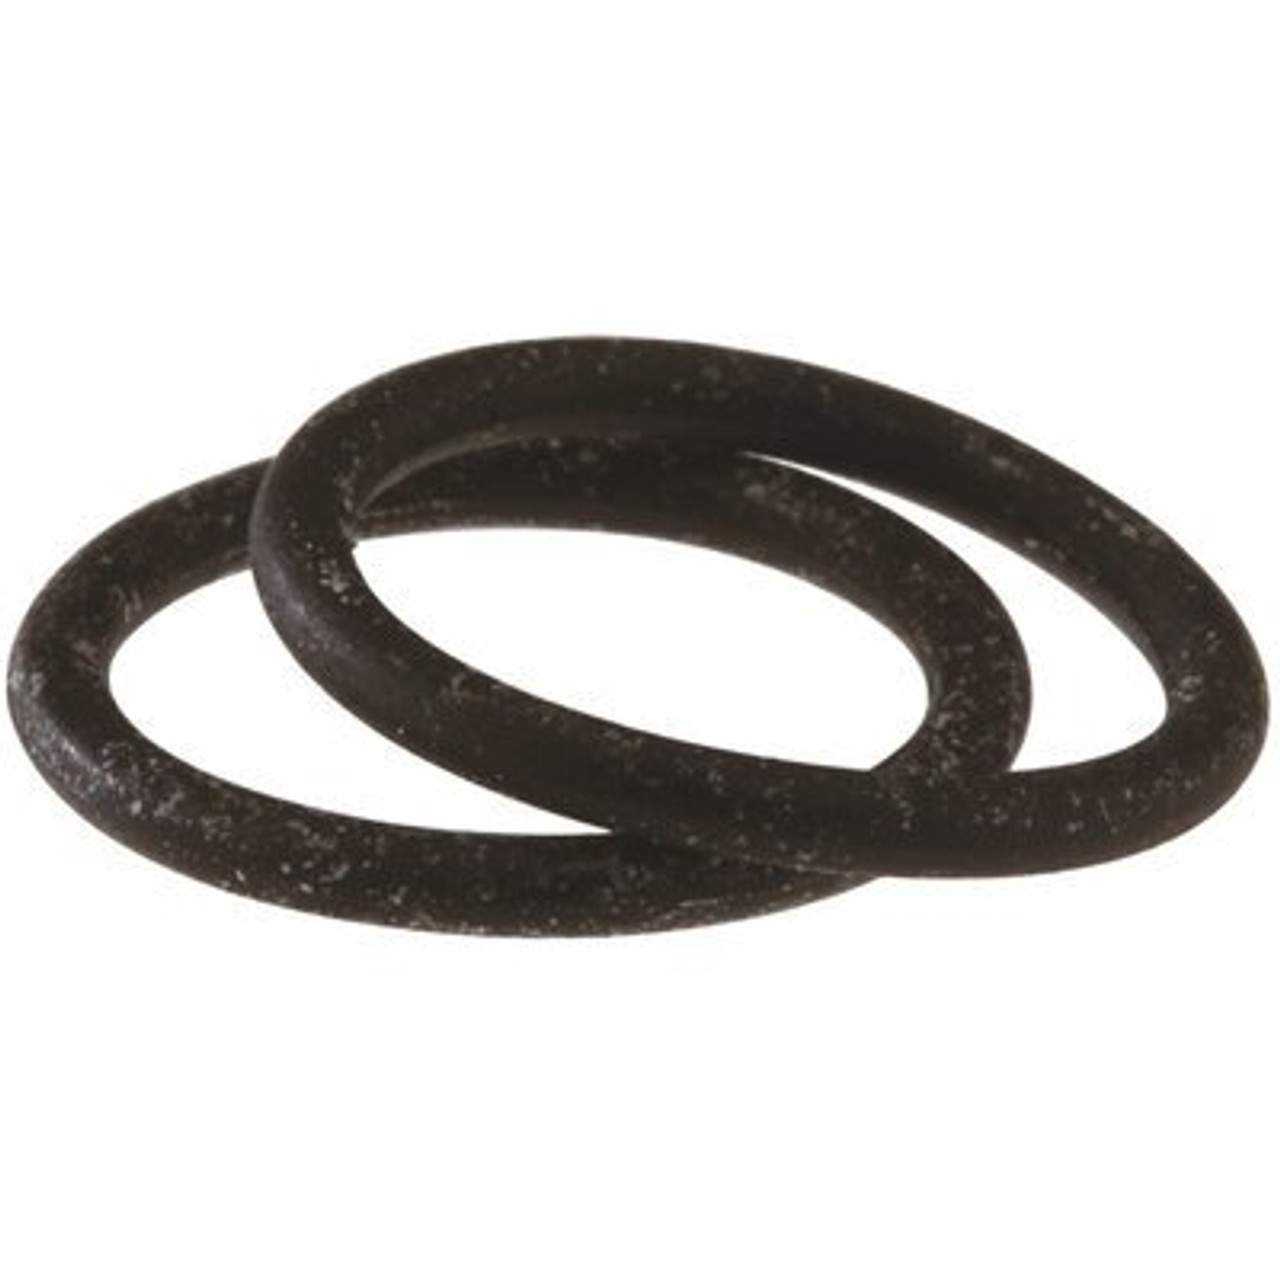 Delta Pair Of Tub And Shower Faucet O-Rings